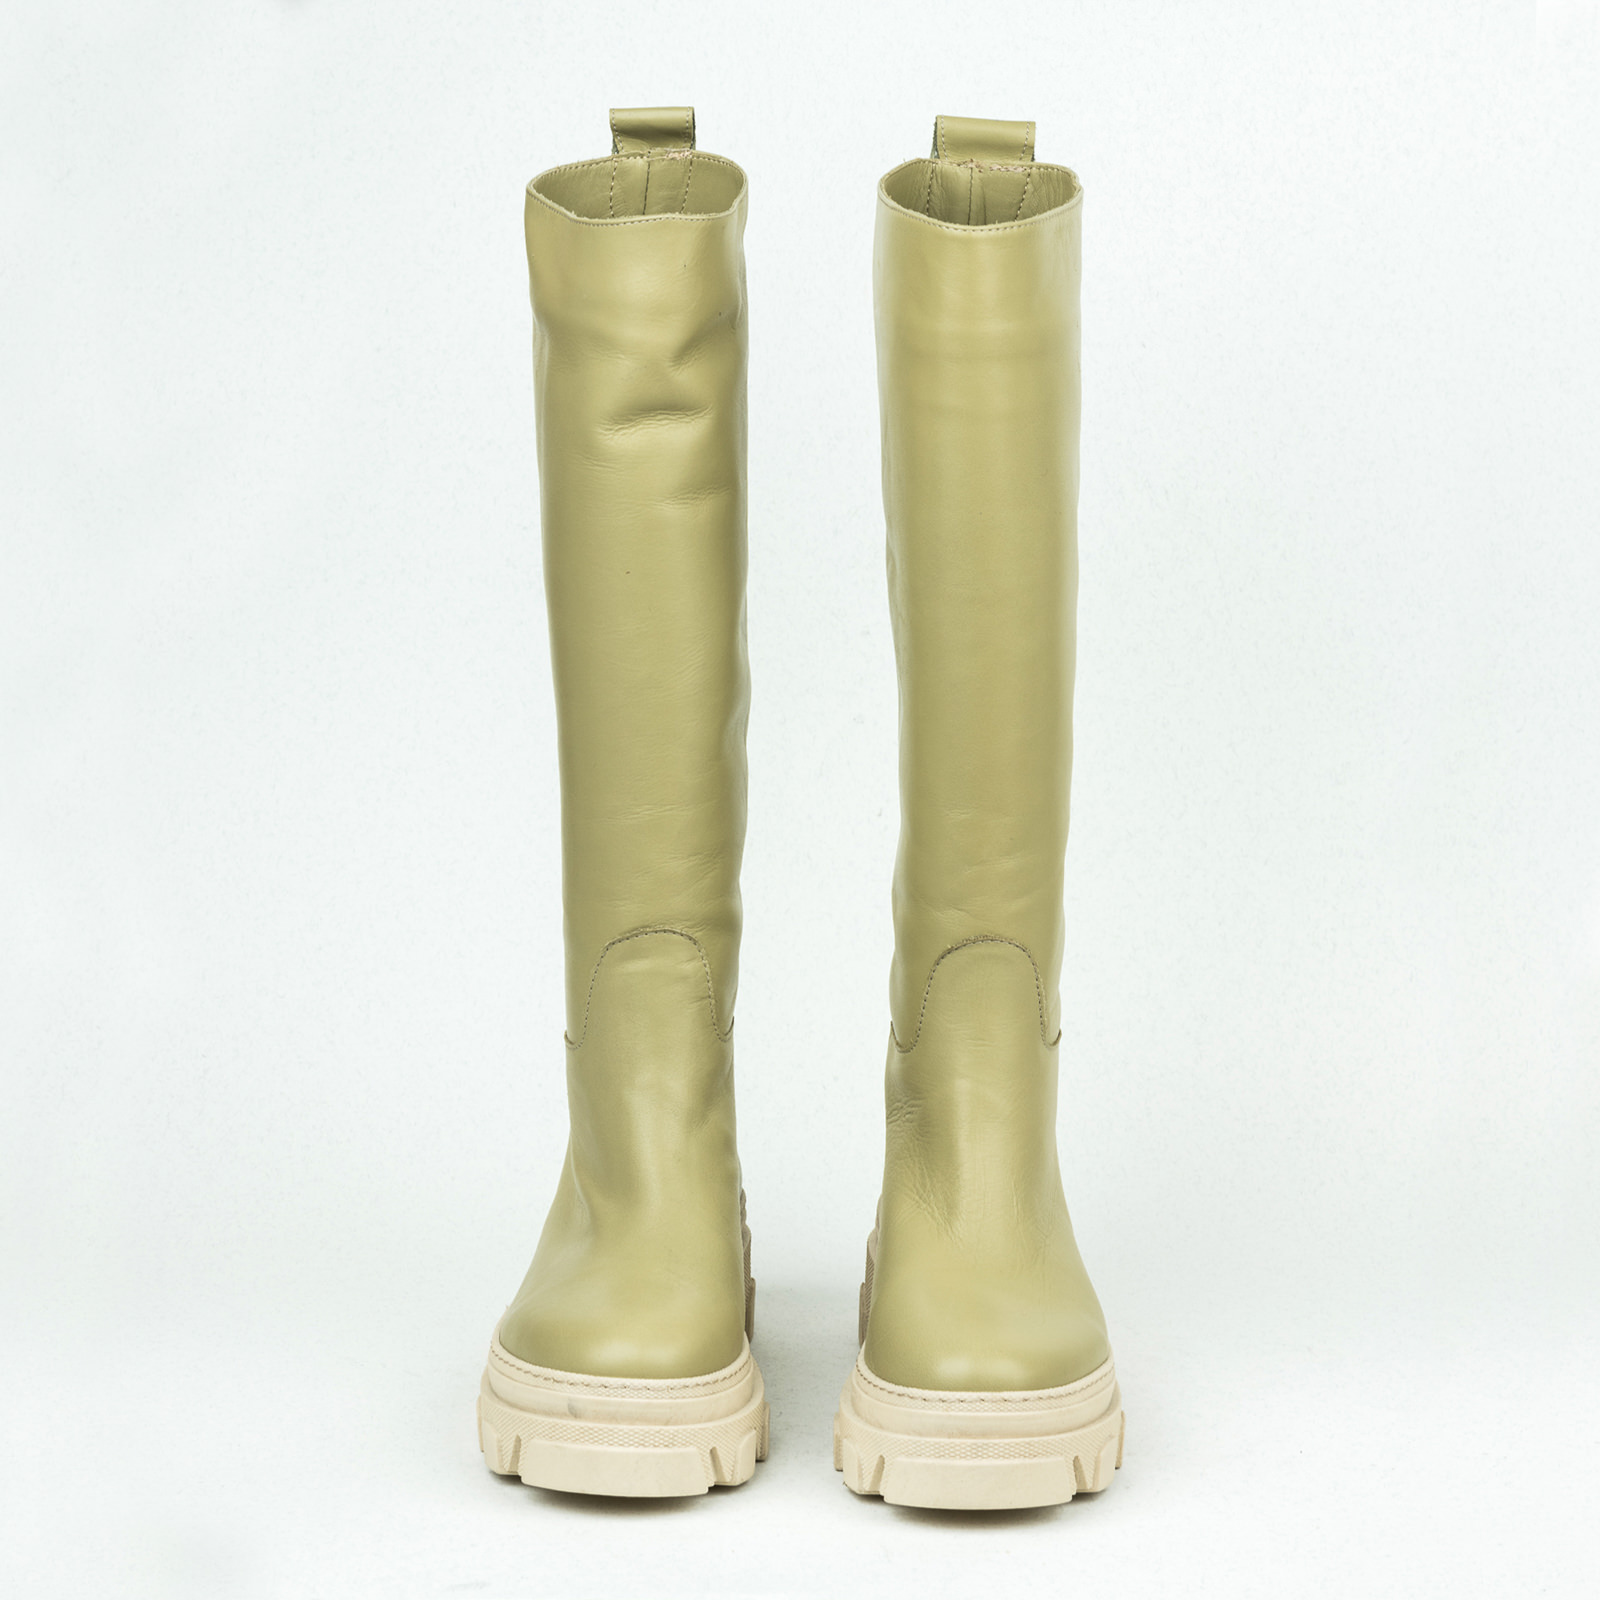 Leather WATERPROOF boots B128 - GREEN